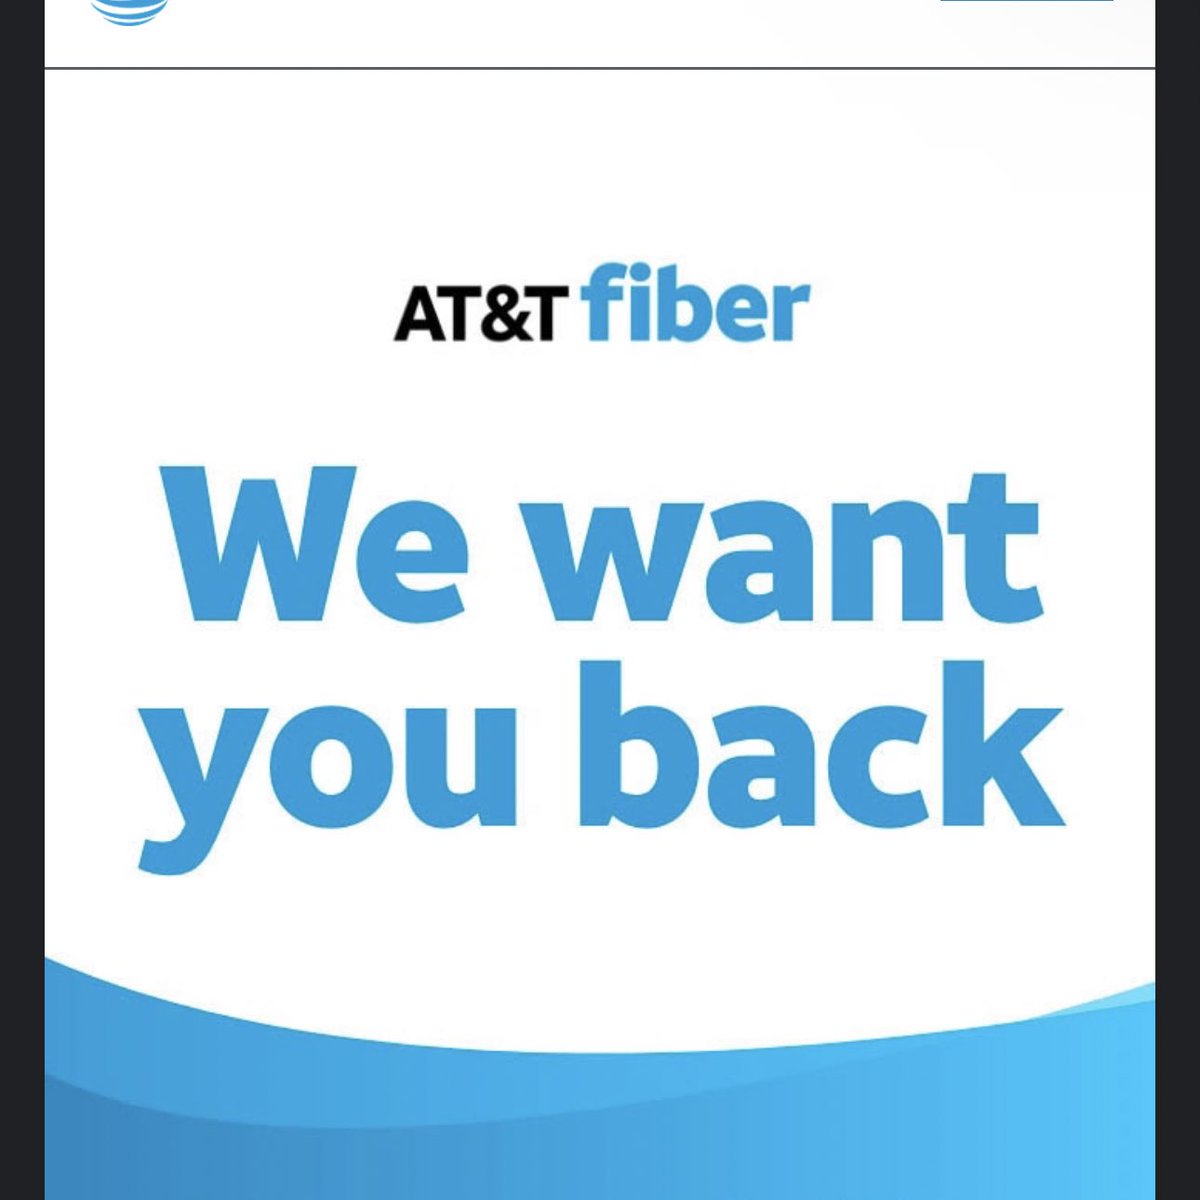 getting sensual “I miss you” emails from @ATT was not on my bucket list